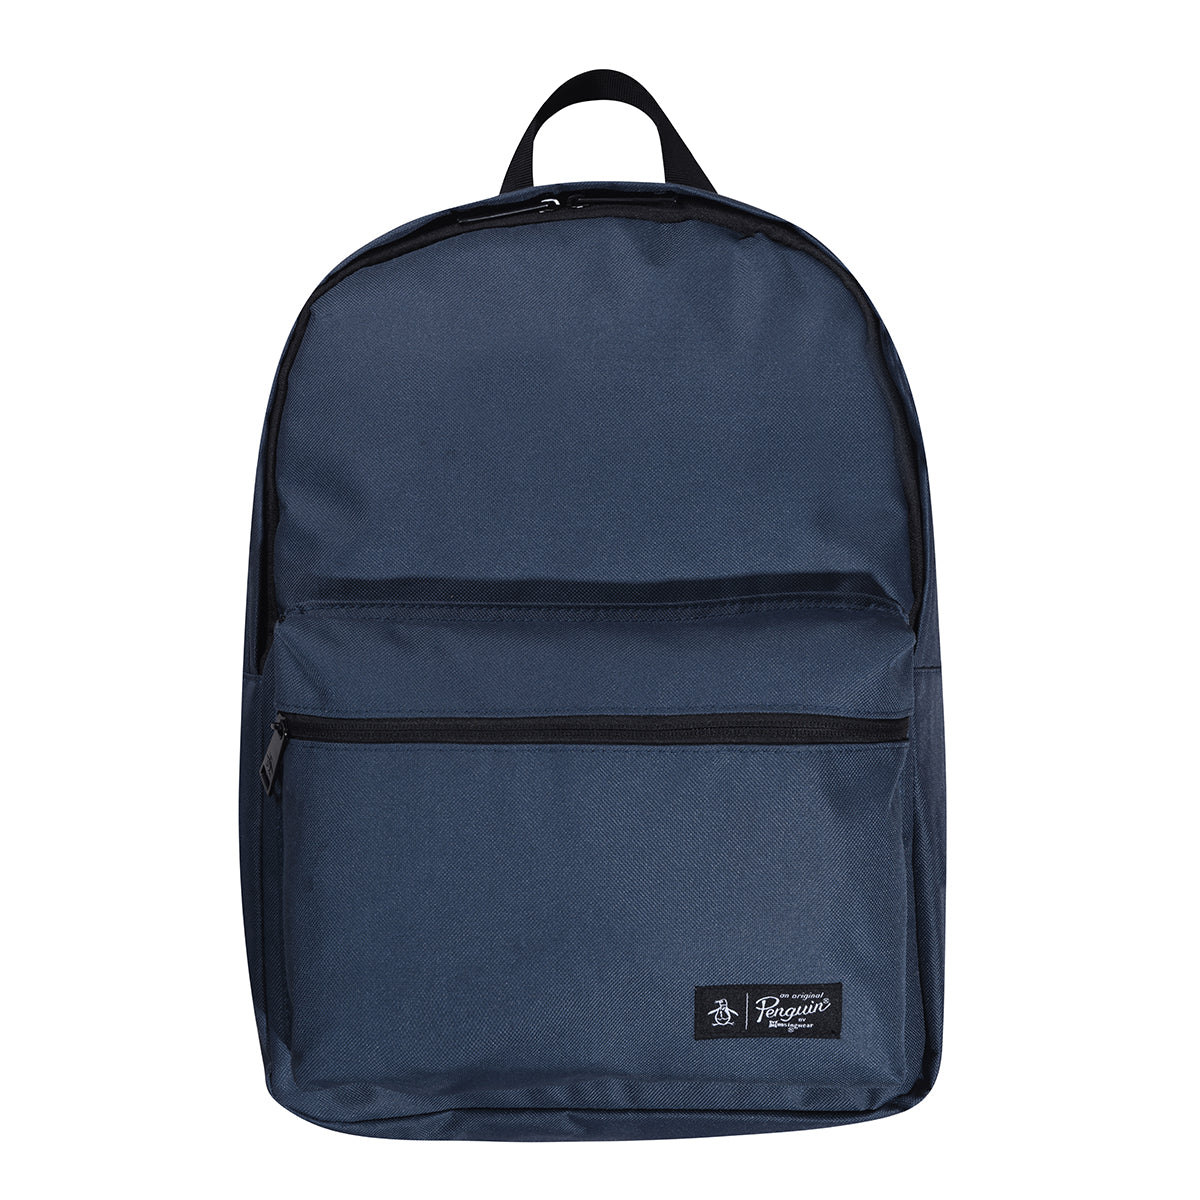 View Original Penguin Jacob Classic Colourblock Backpack In Navy Blue Mens information